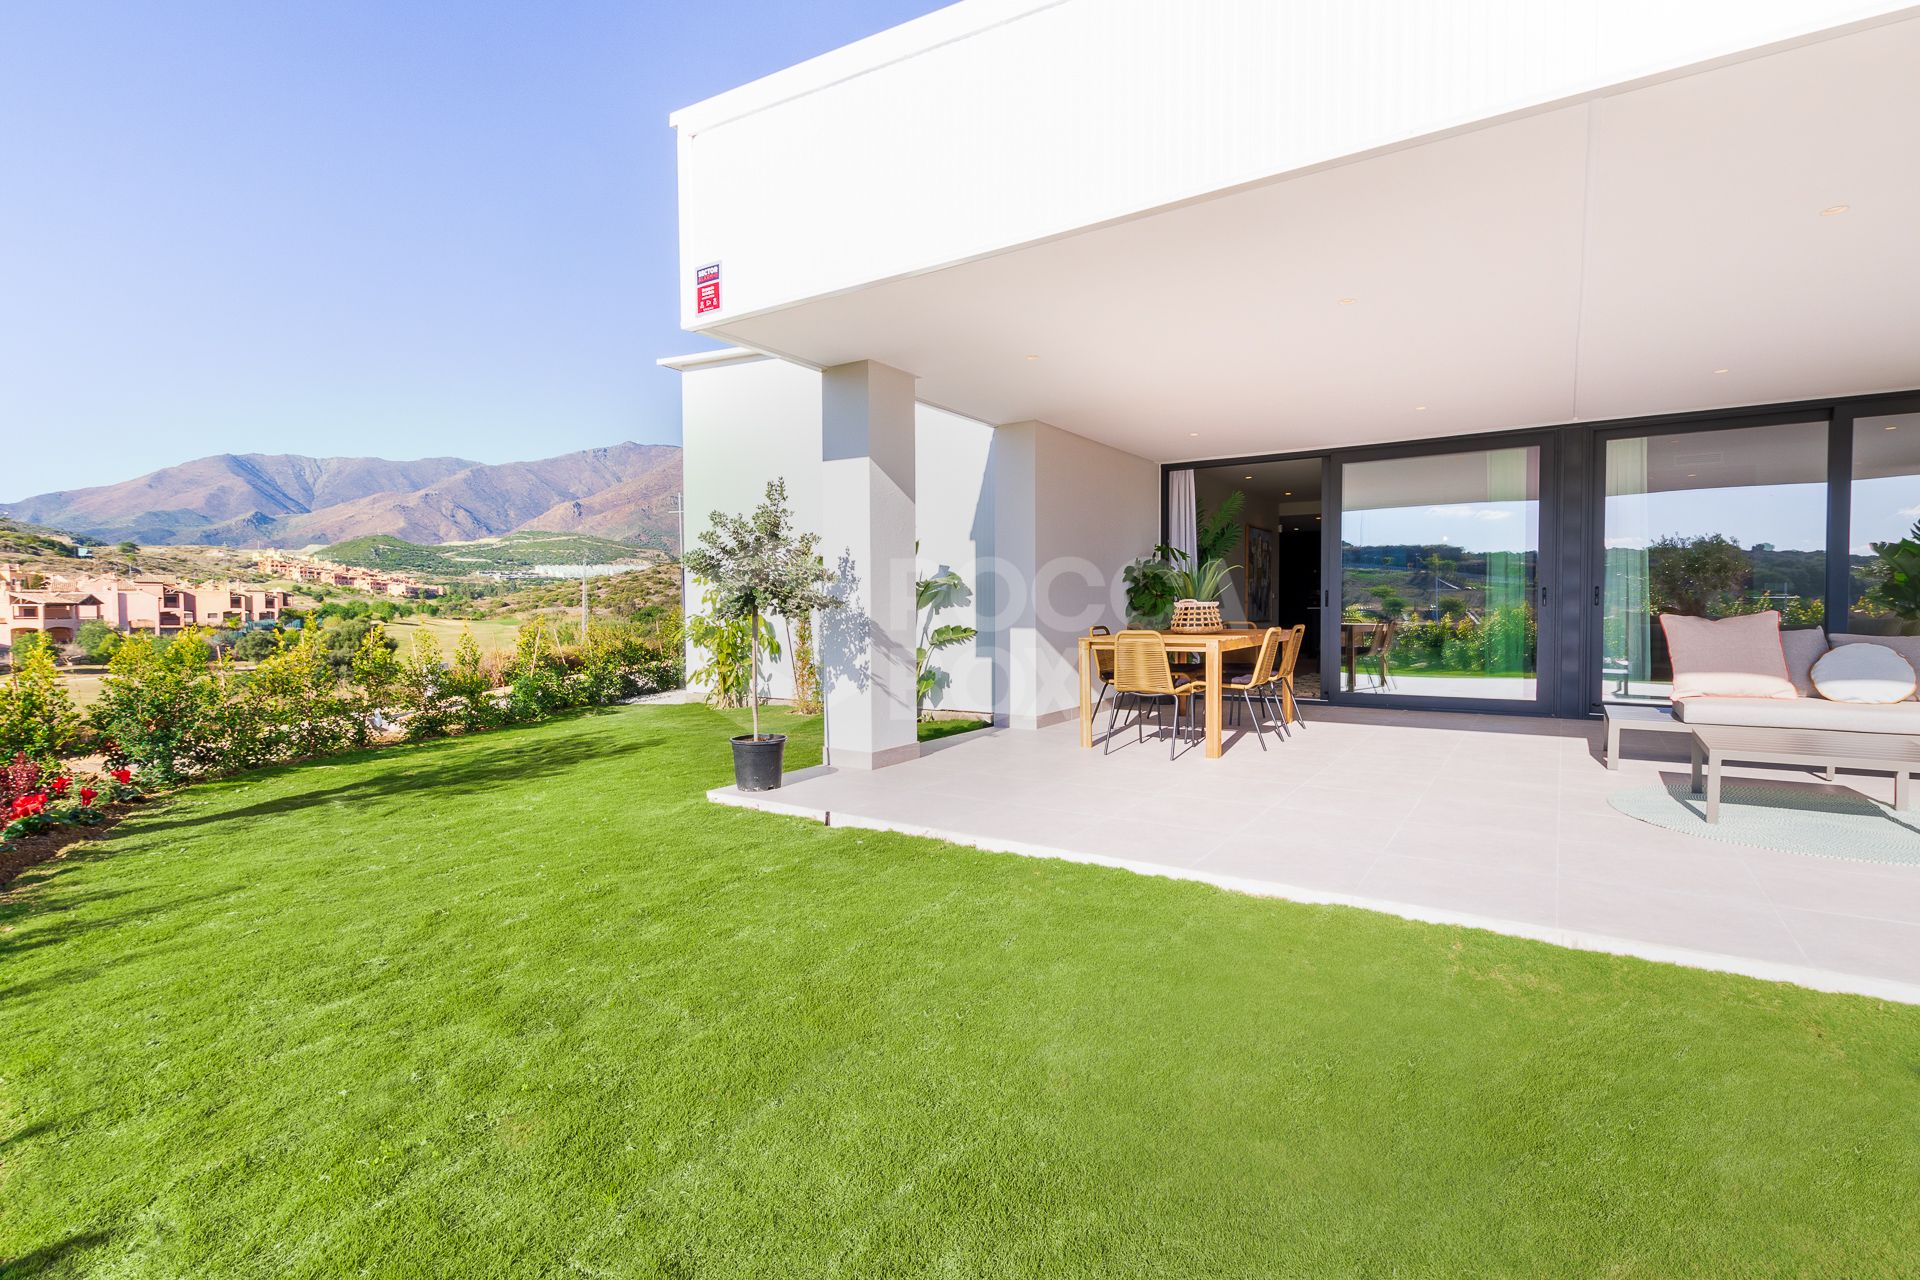 Introducing a Contemporary Haven: Your Dream Home Awaits